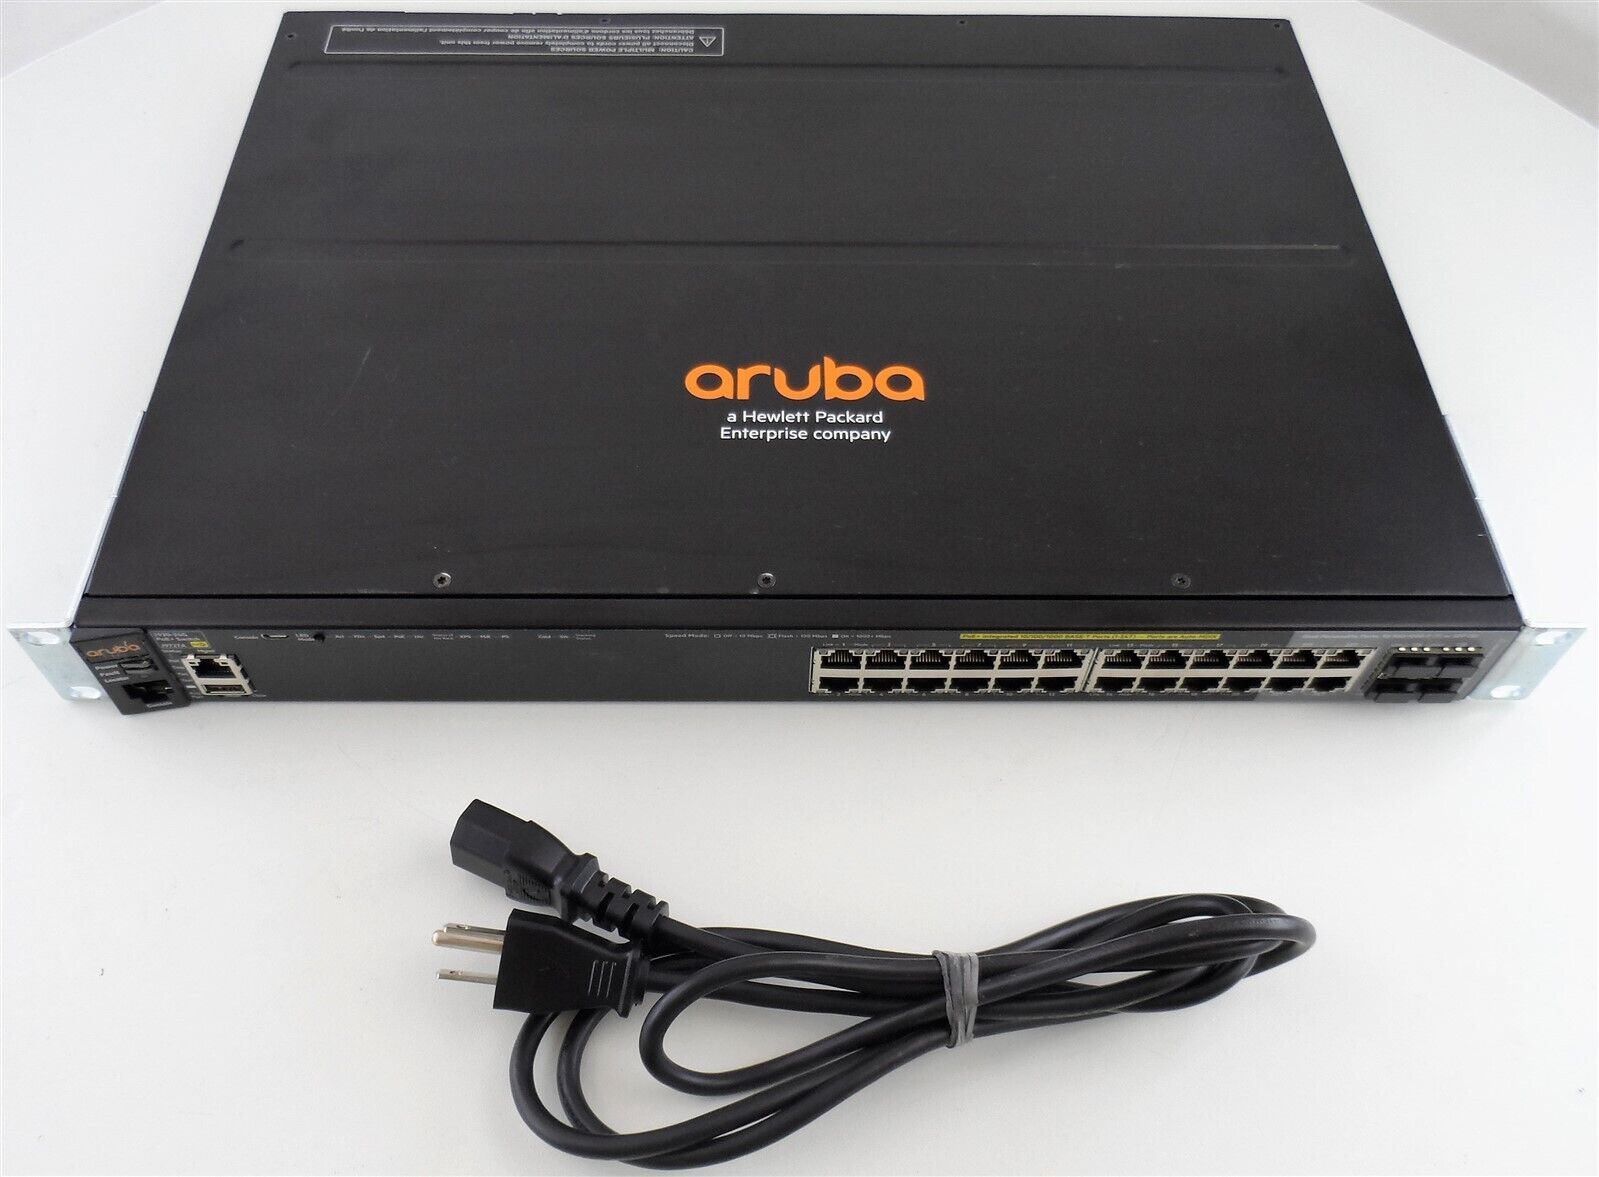 HP Aruba 2920-25G (J9727A) PoE+ Switch with Power Cable Used